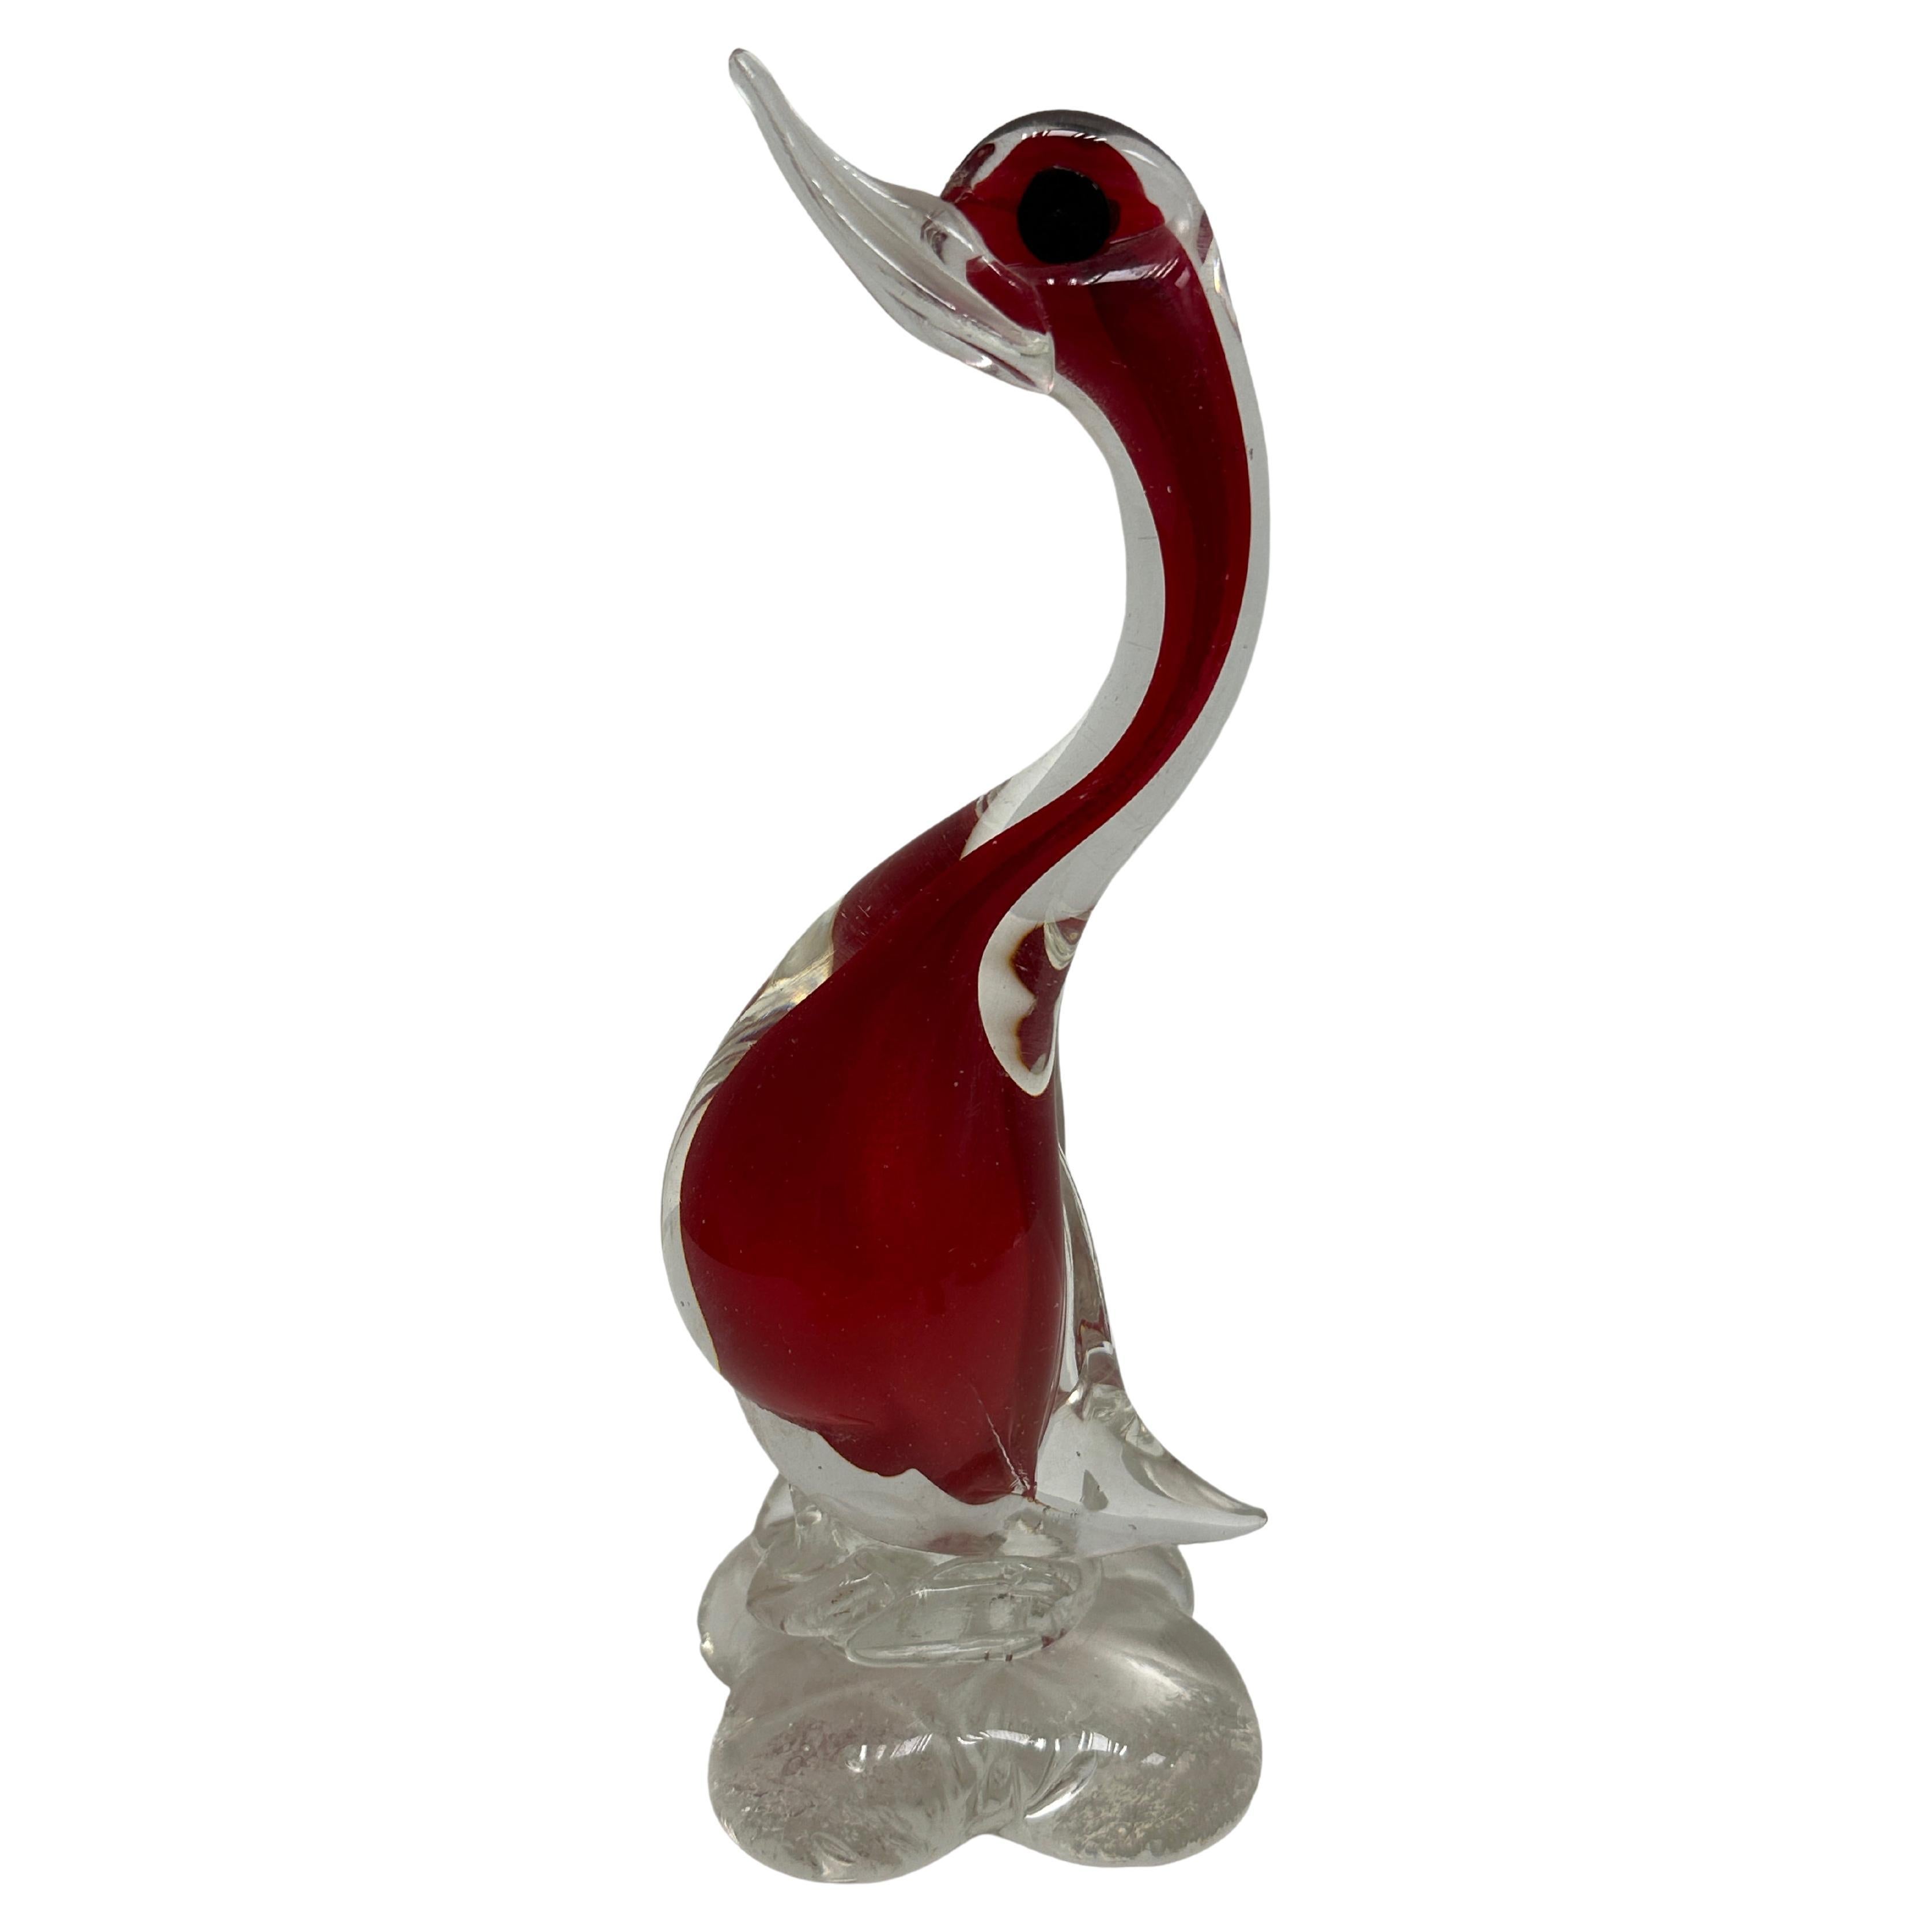 This stunning vintage Murano Italian art glass duck sculpture was purchased at an estate sale in Rovereto, Italy. It was made in the traditional Murano style, which is a centuries-old technique that requires great skill and expertise. The duck is